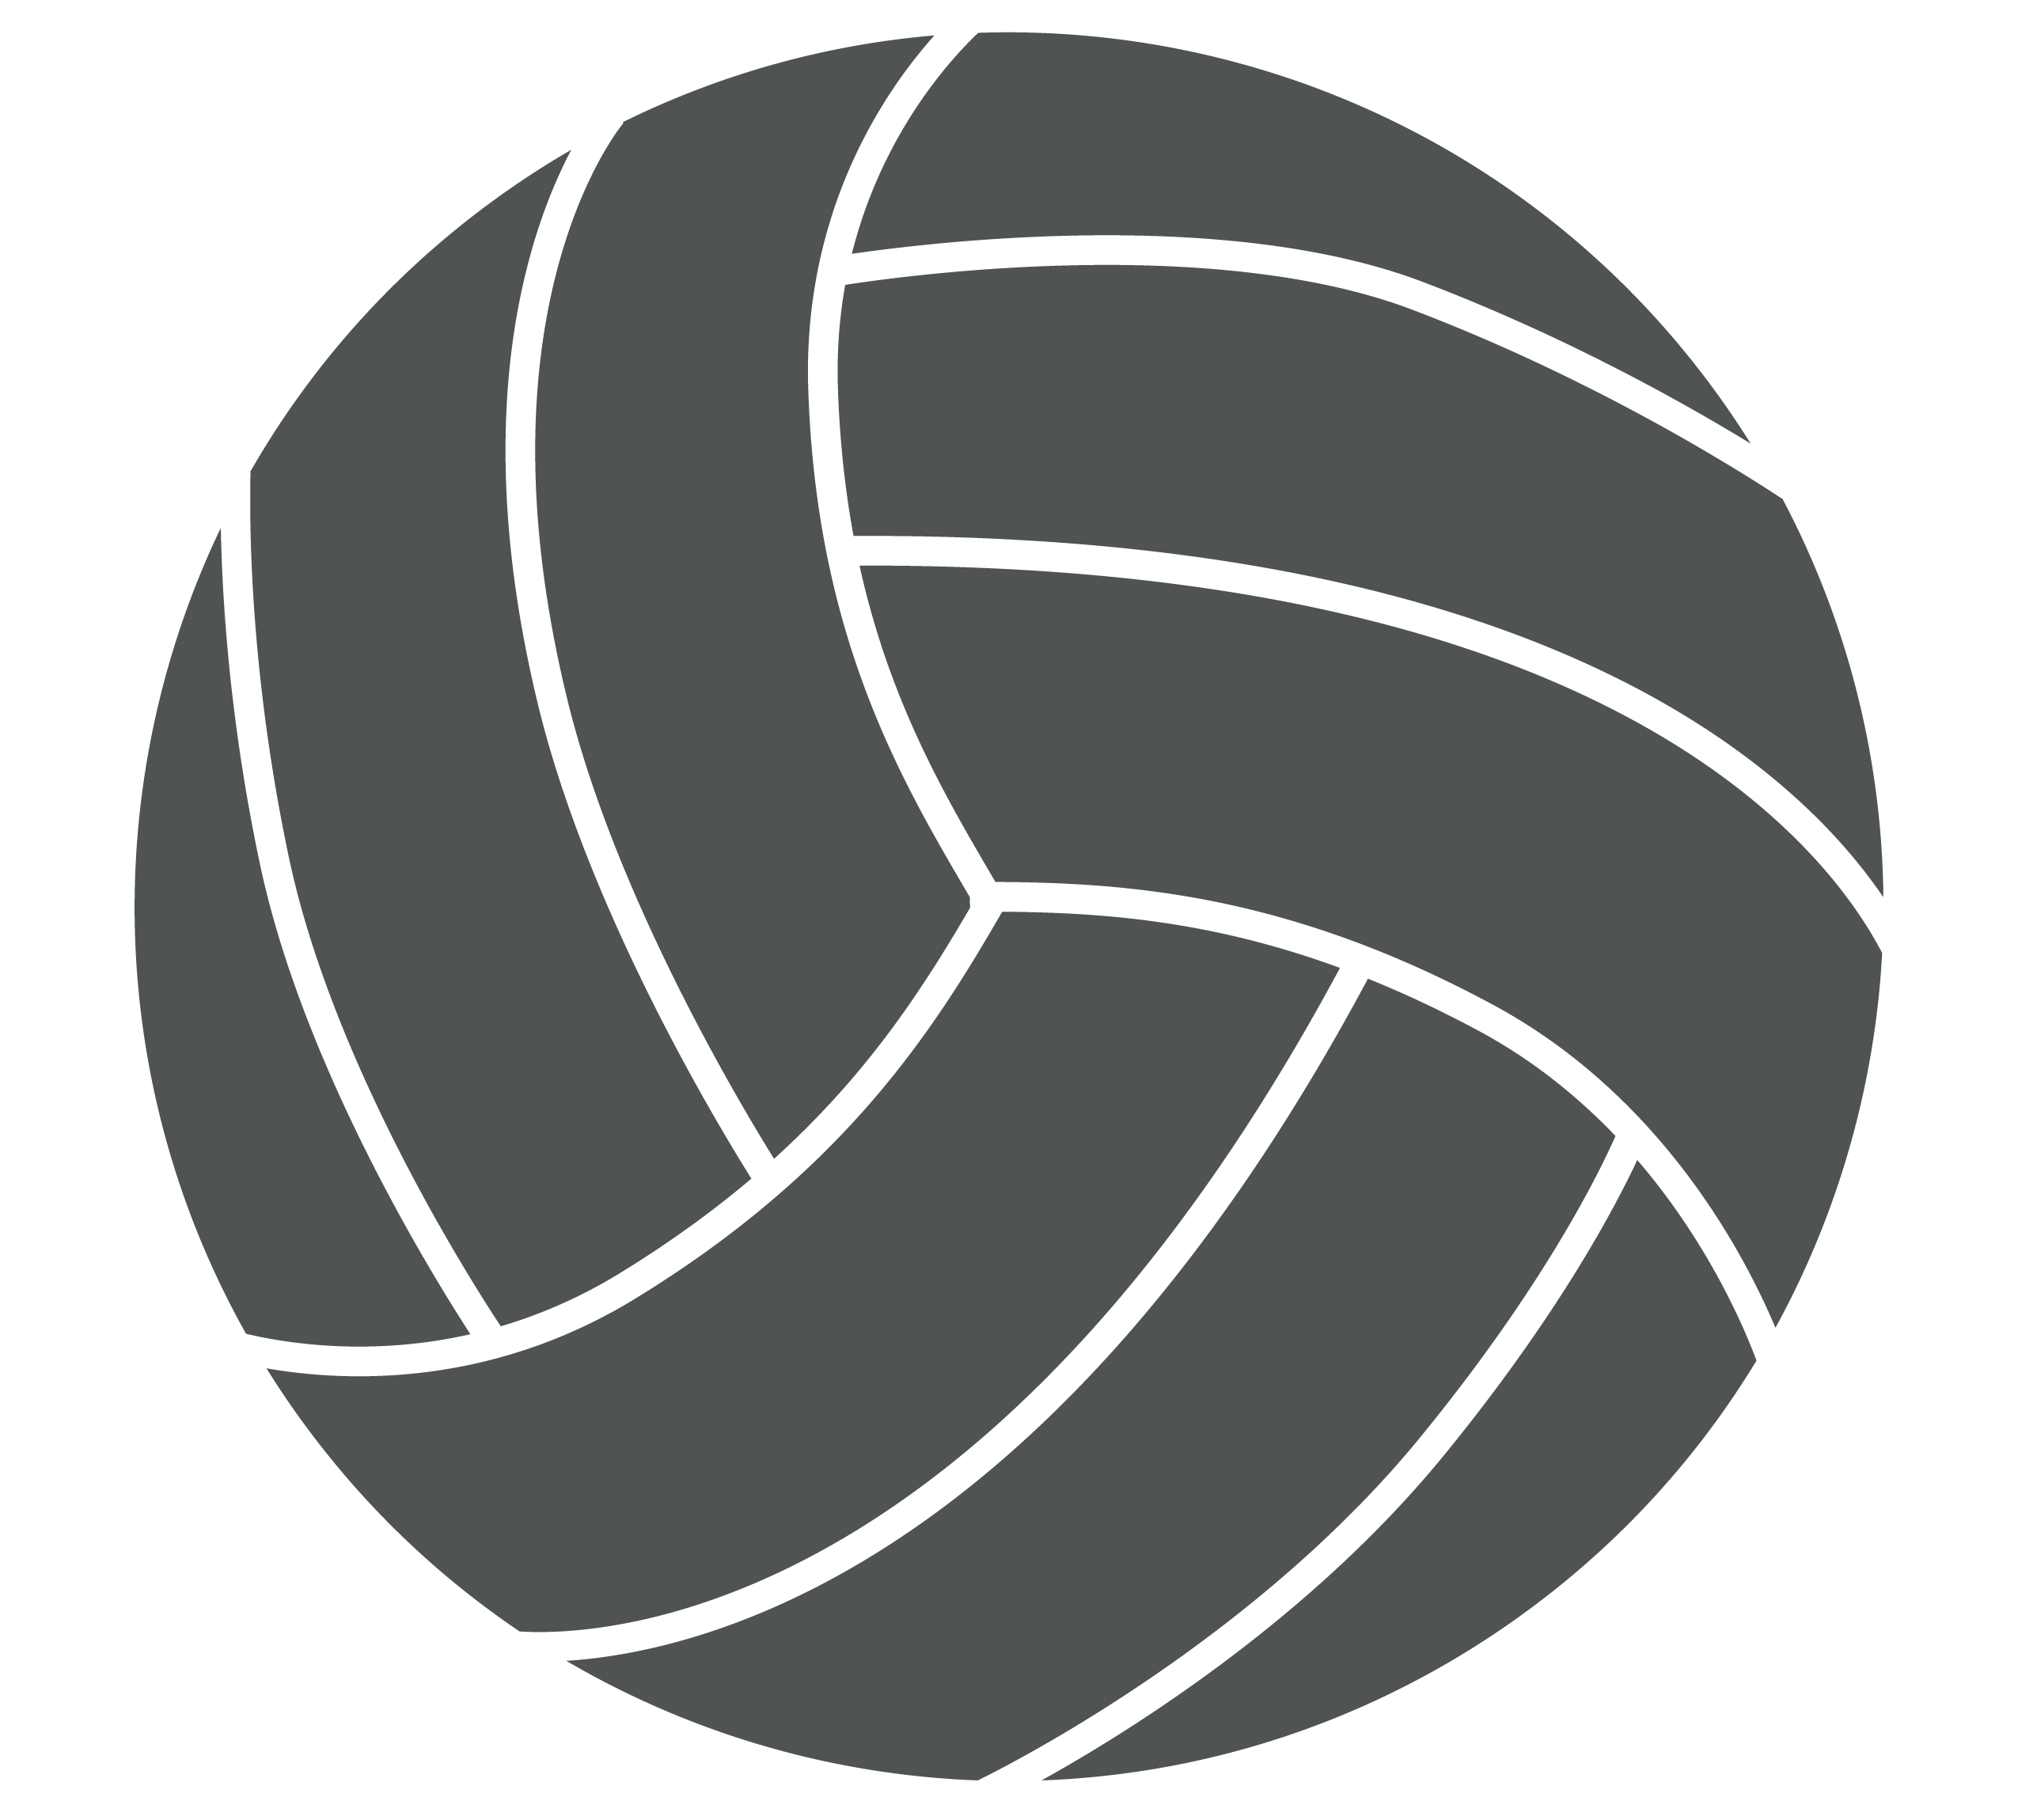 volleyball clipart with no background - photo #27